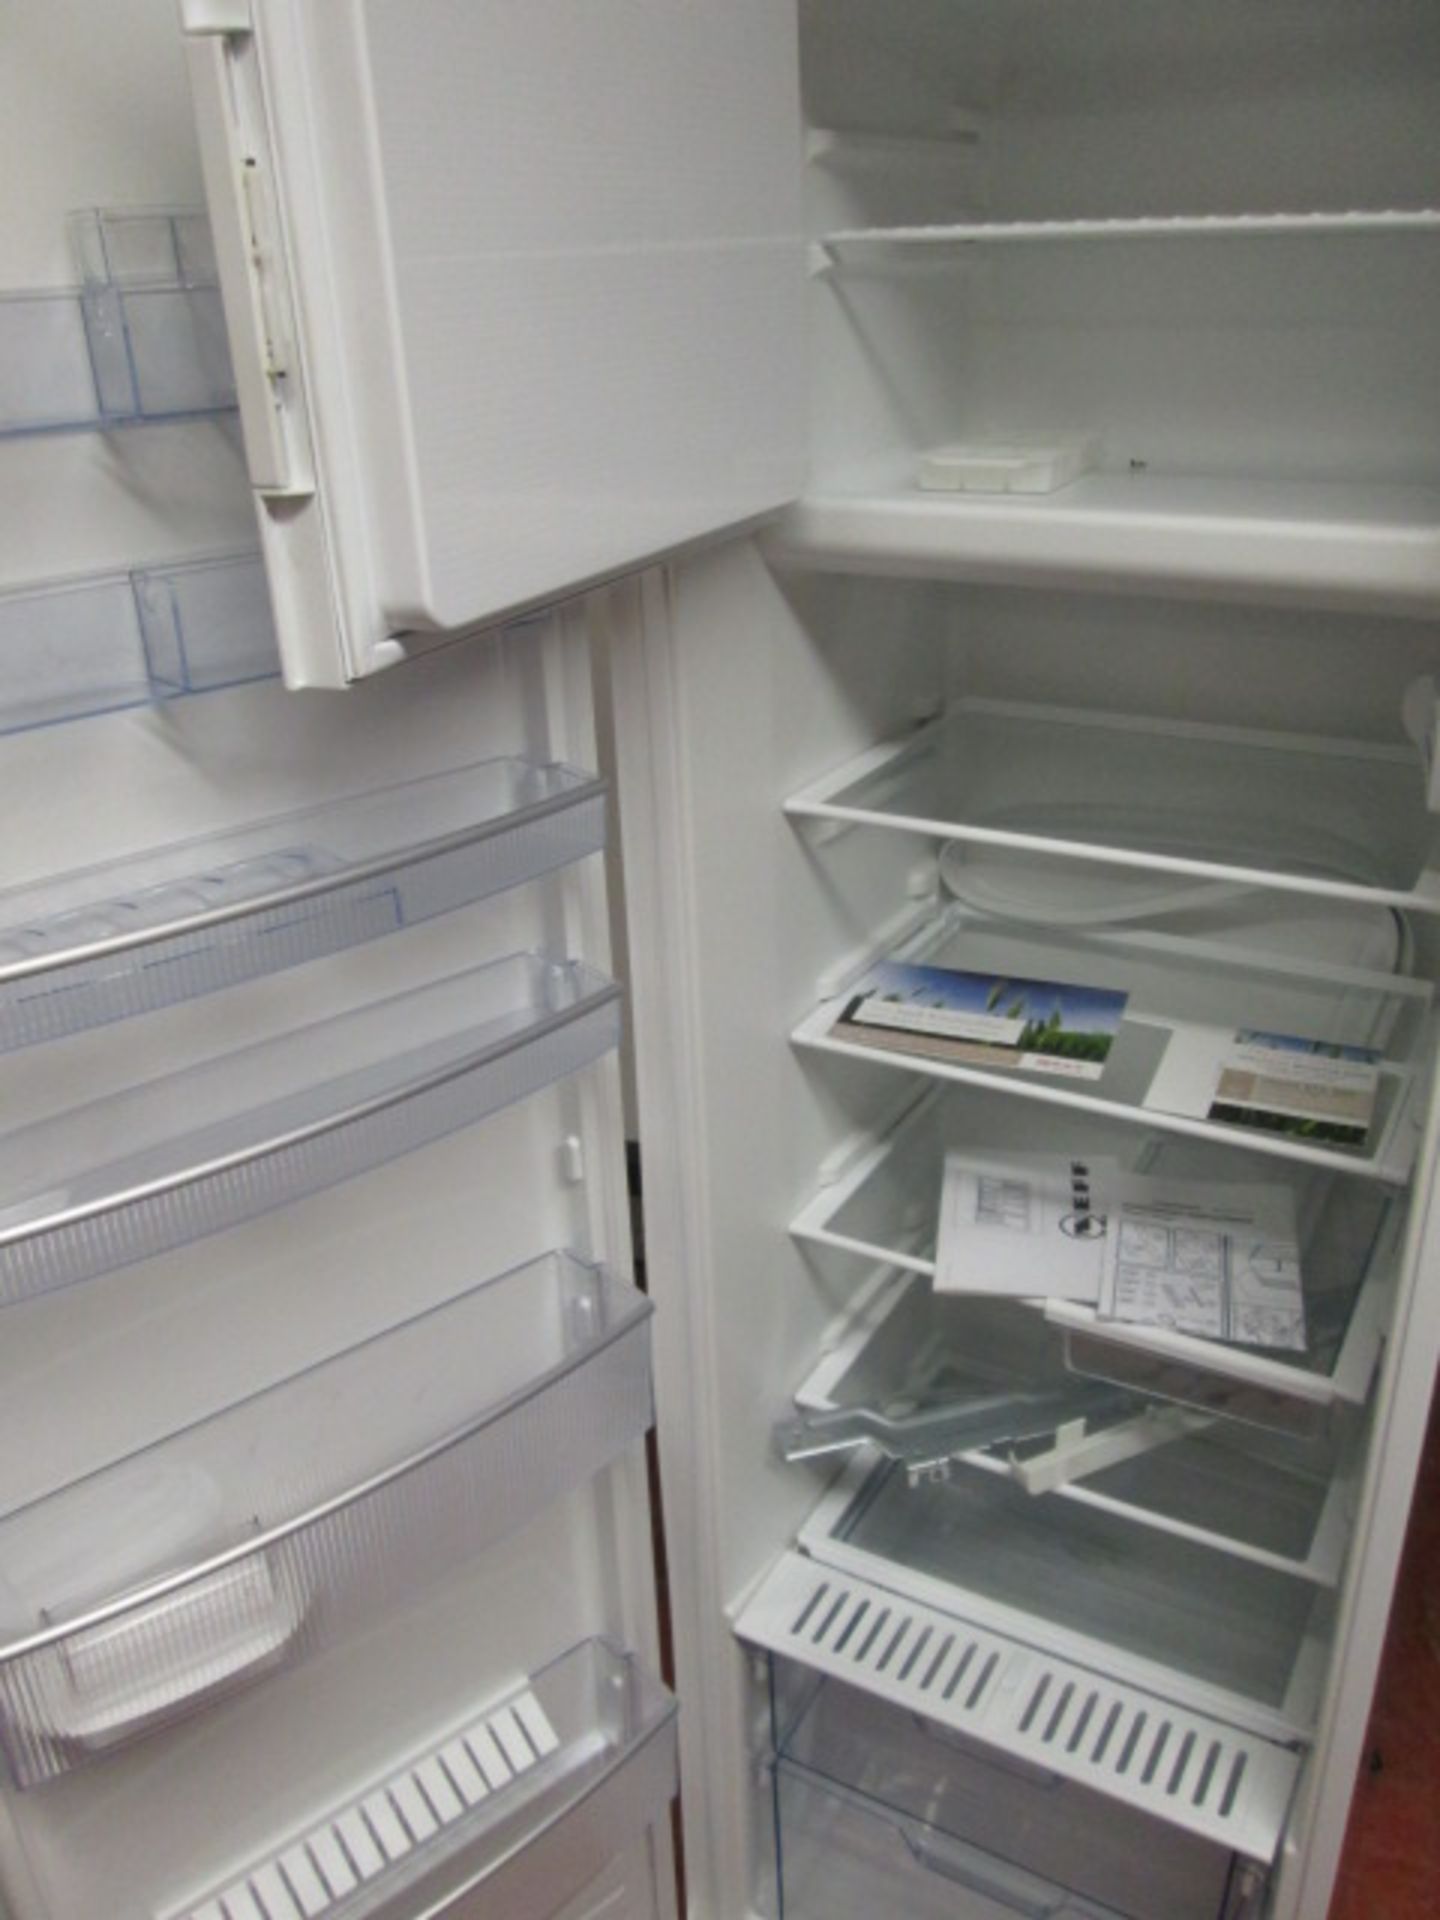 Neff Integrated Fridge with Ice Box, Model FD9012 with Installation and Operating Instructions, 1780 - Image 4 of 4